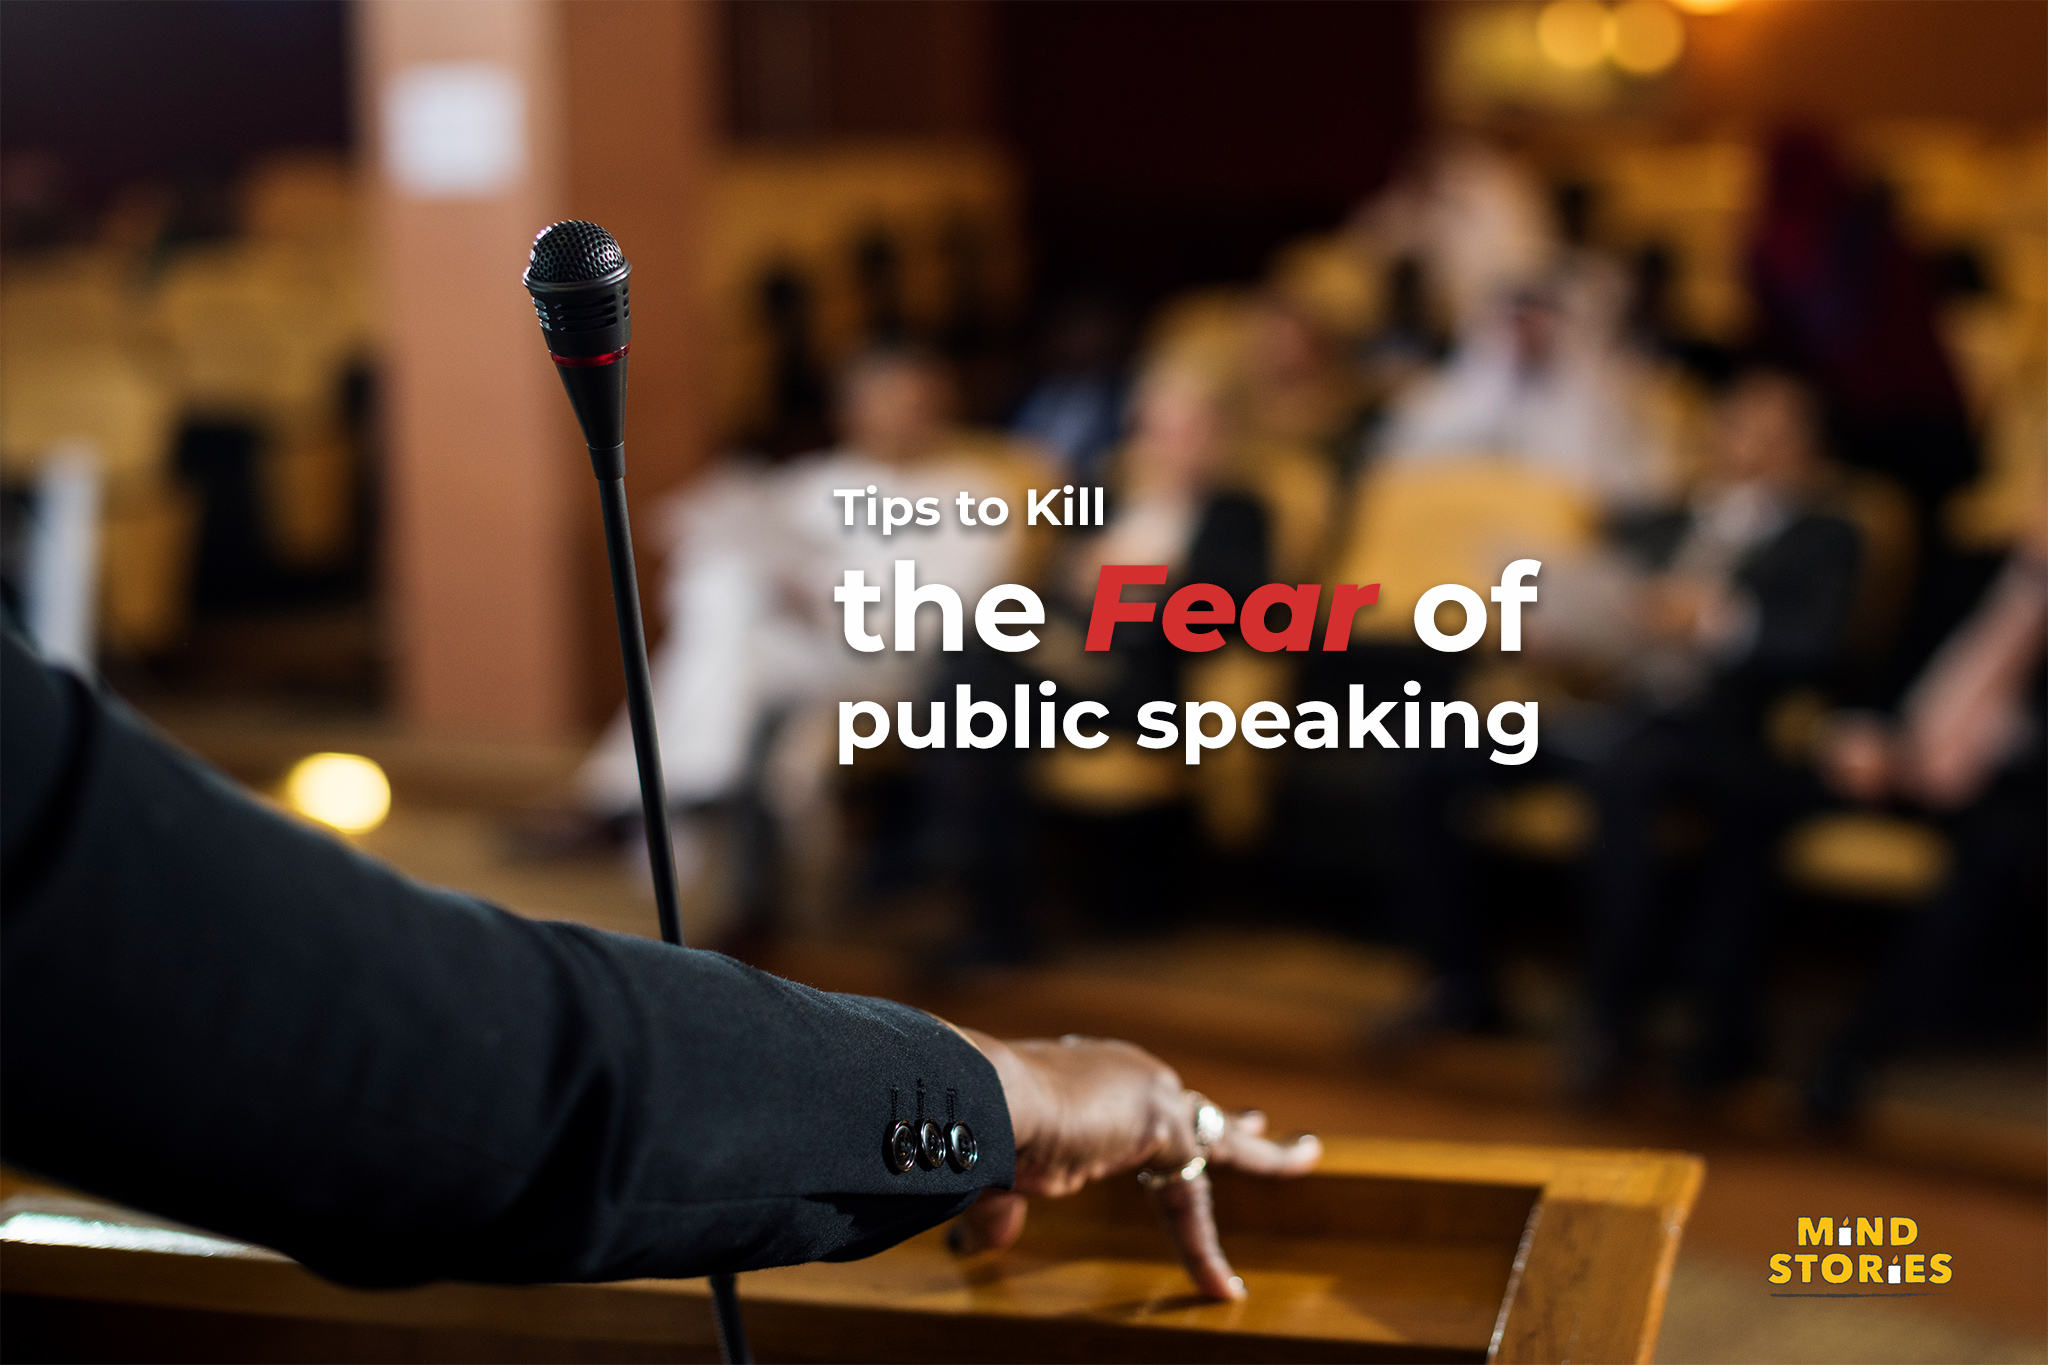 image from Tips to kill the fear of public speaking